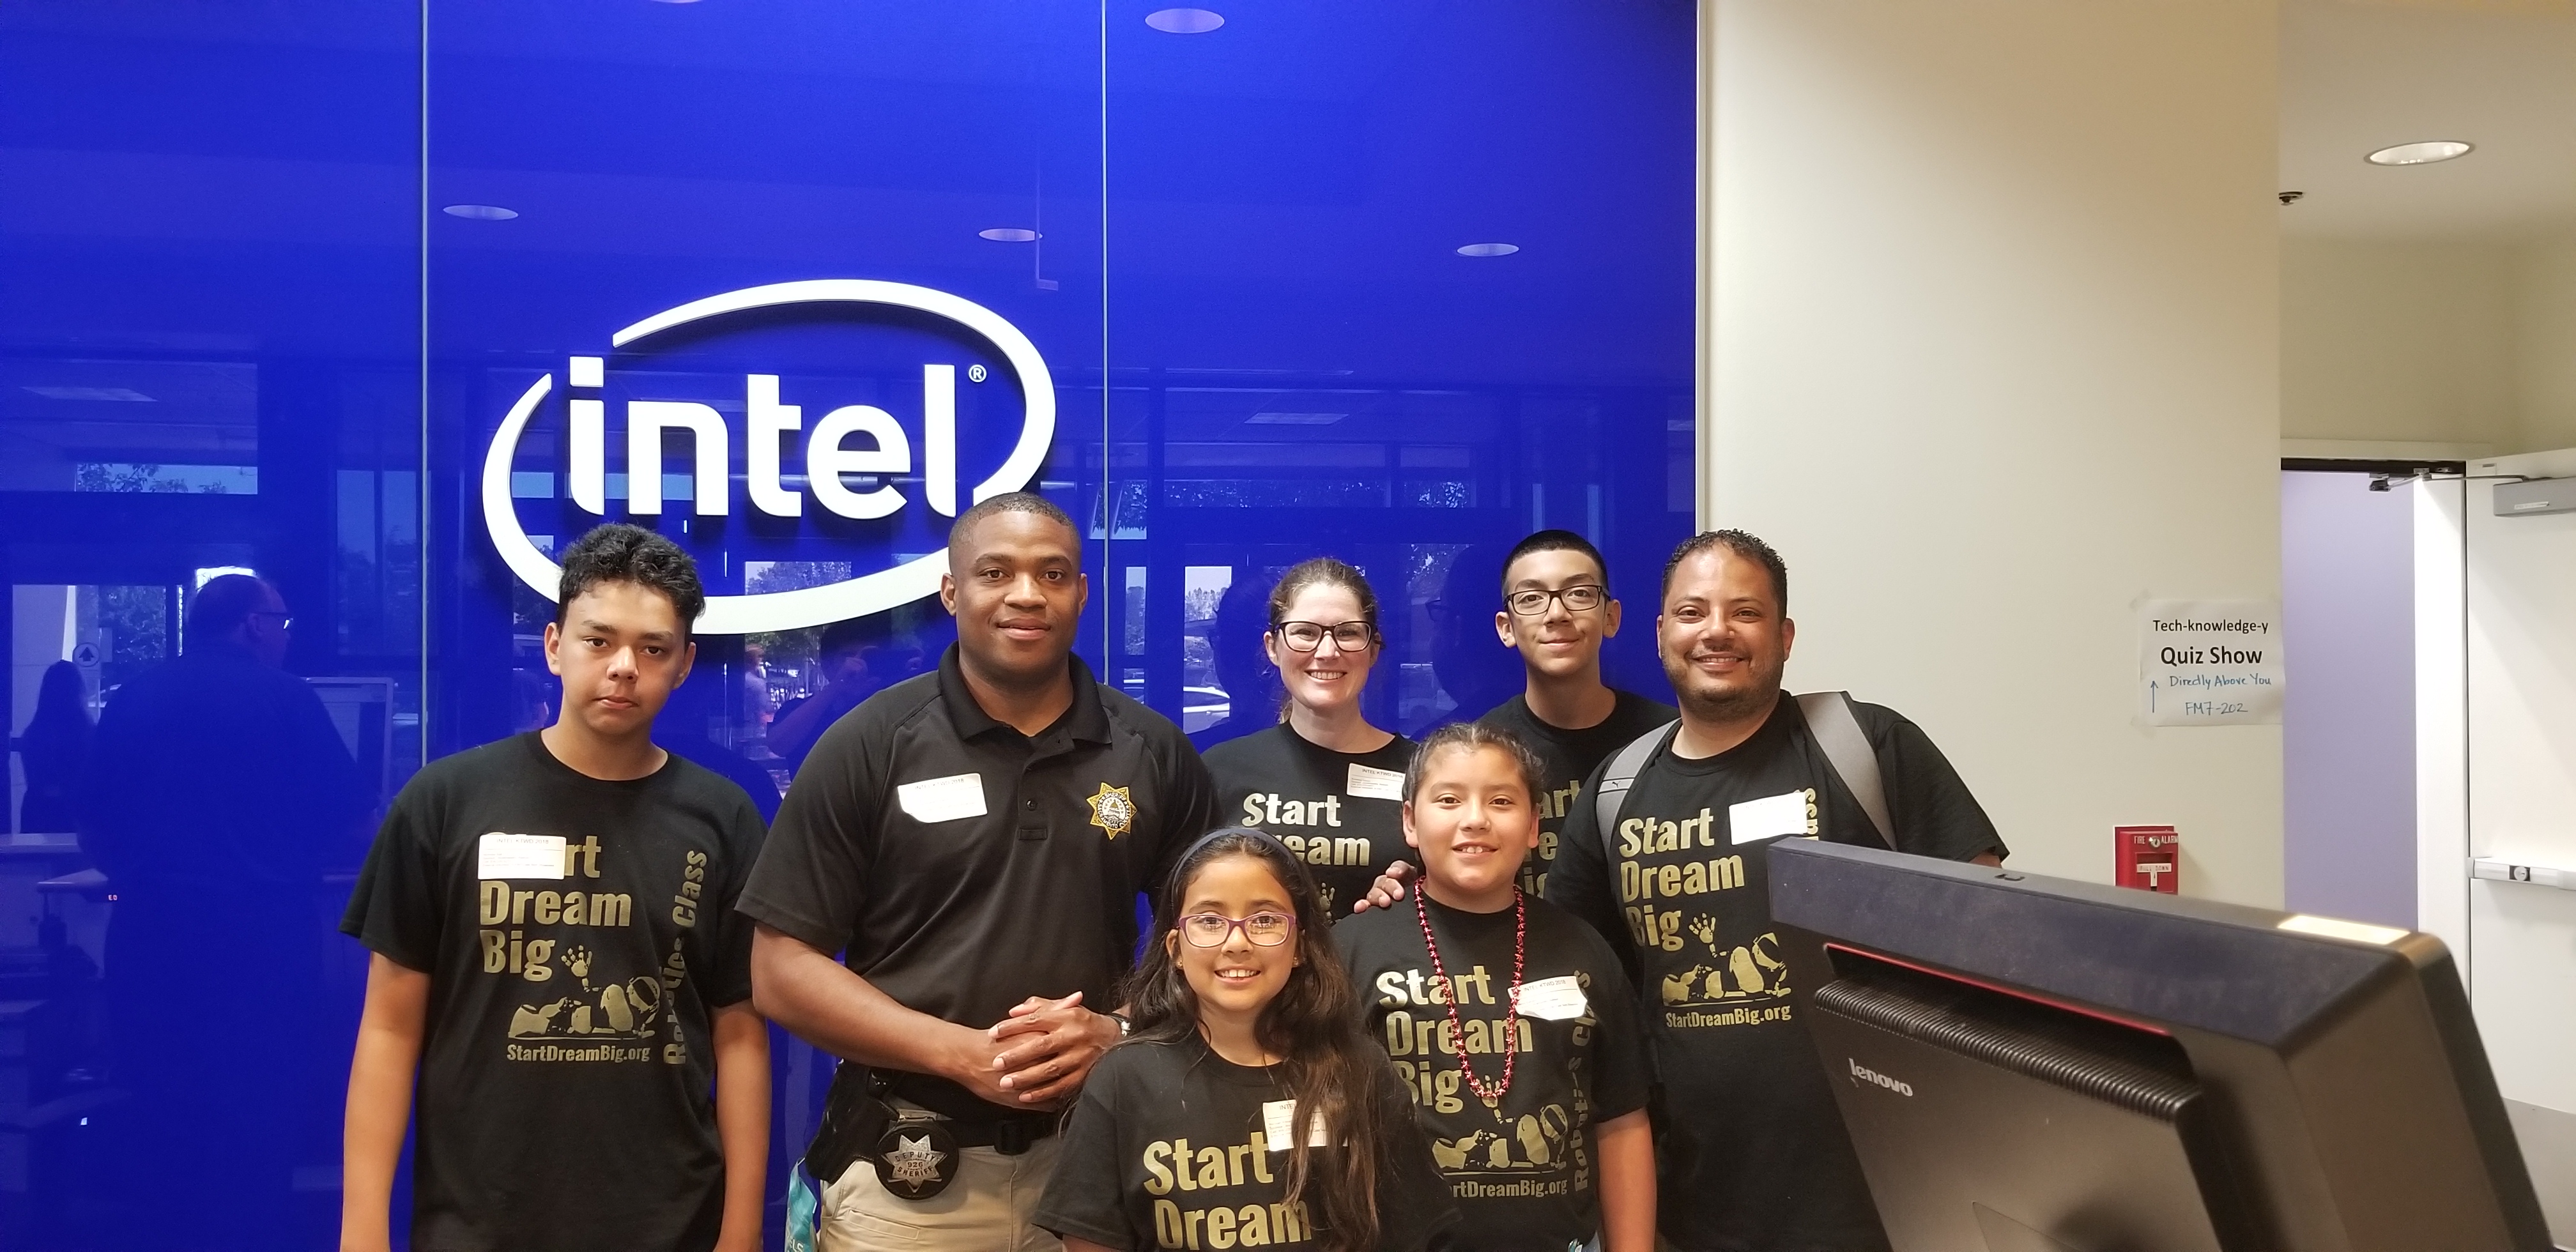 Kid To Work Day 2018 at Intel